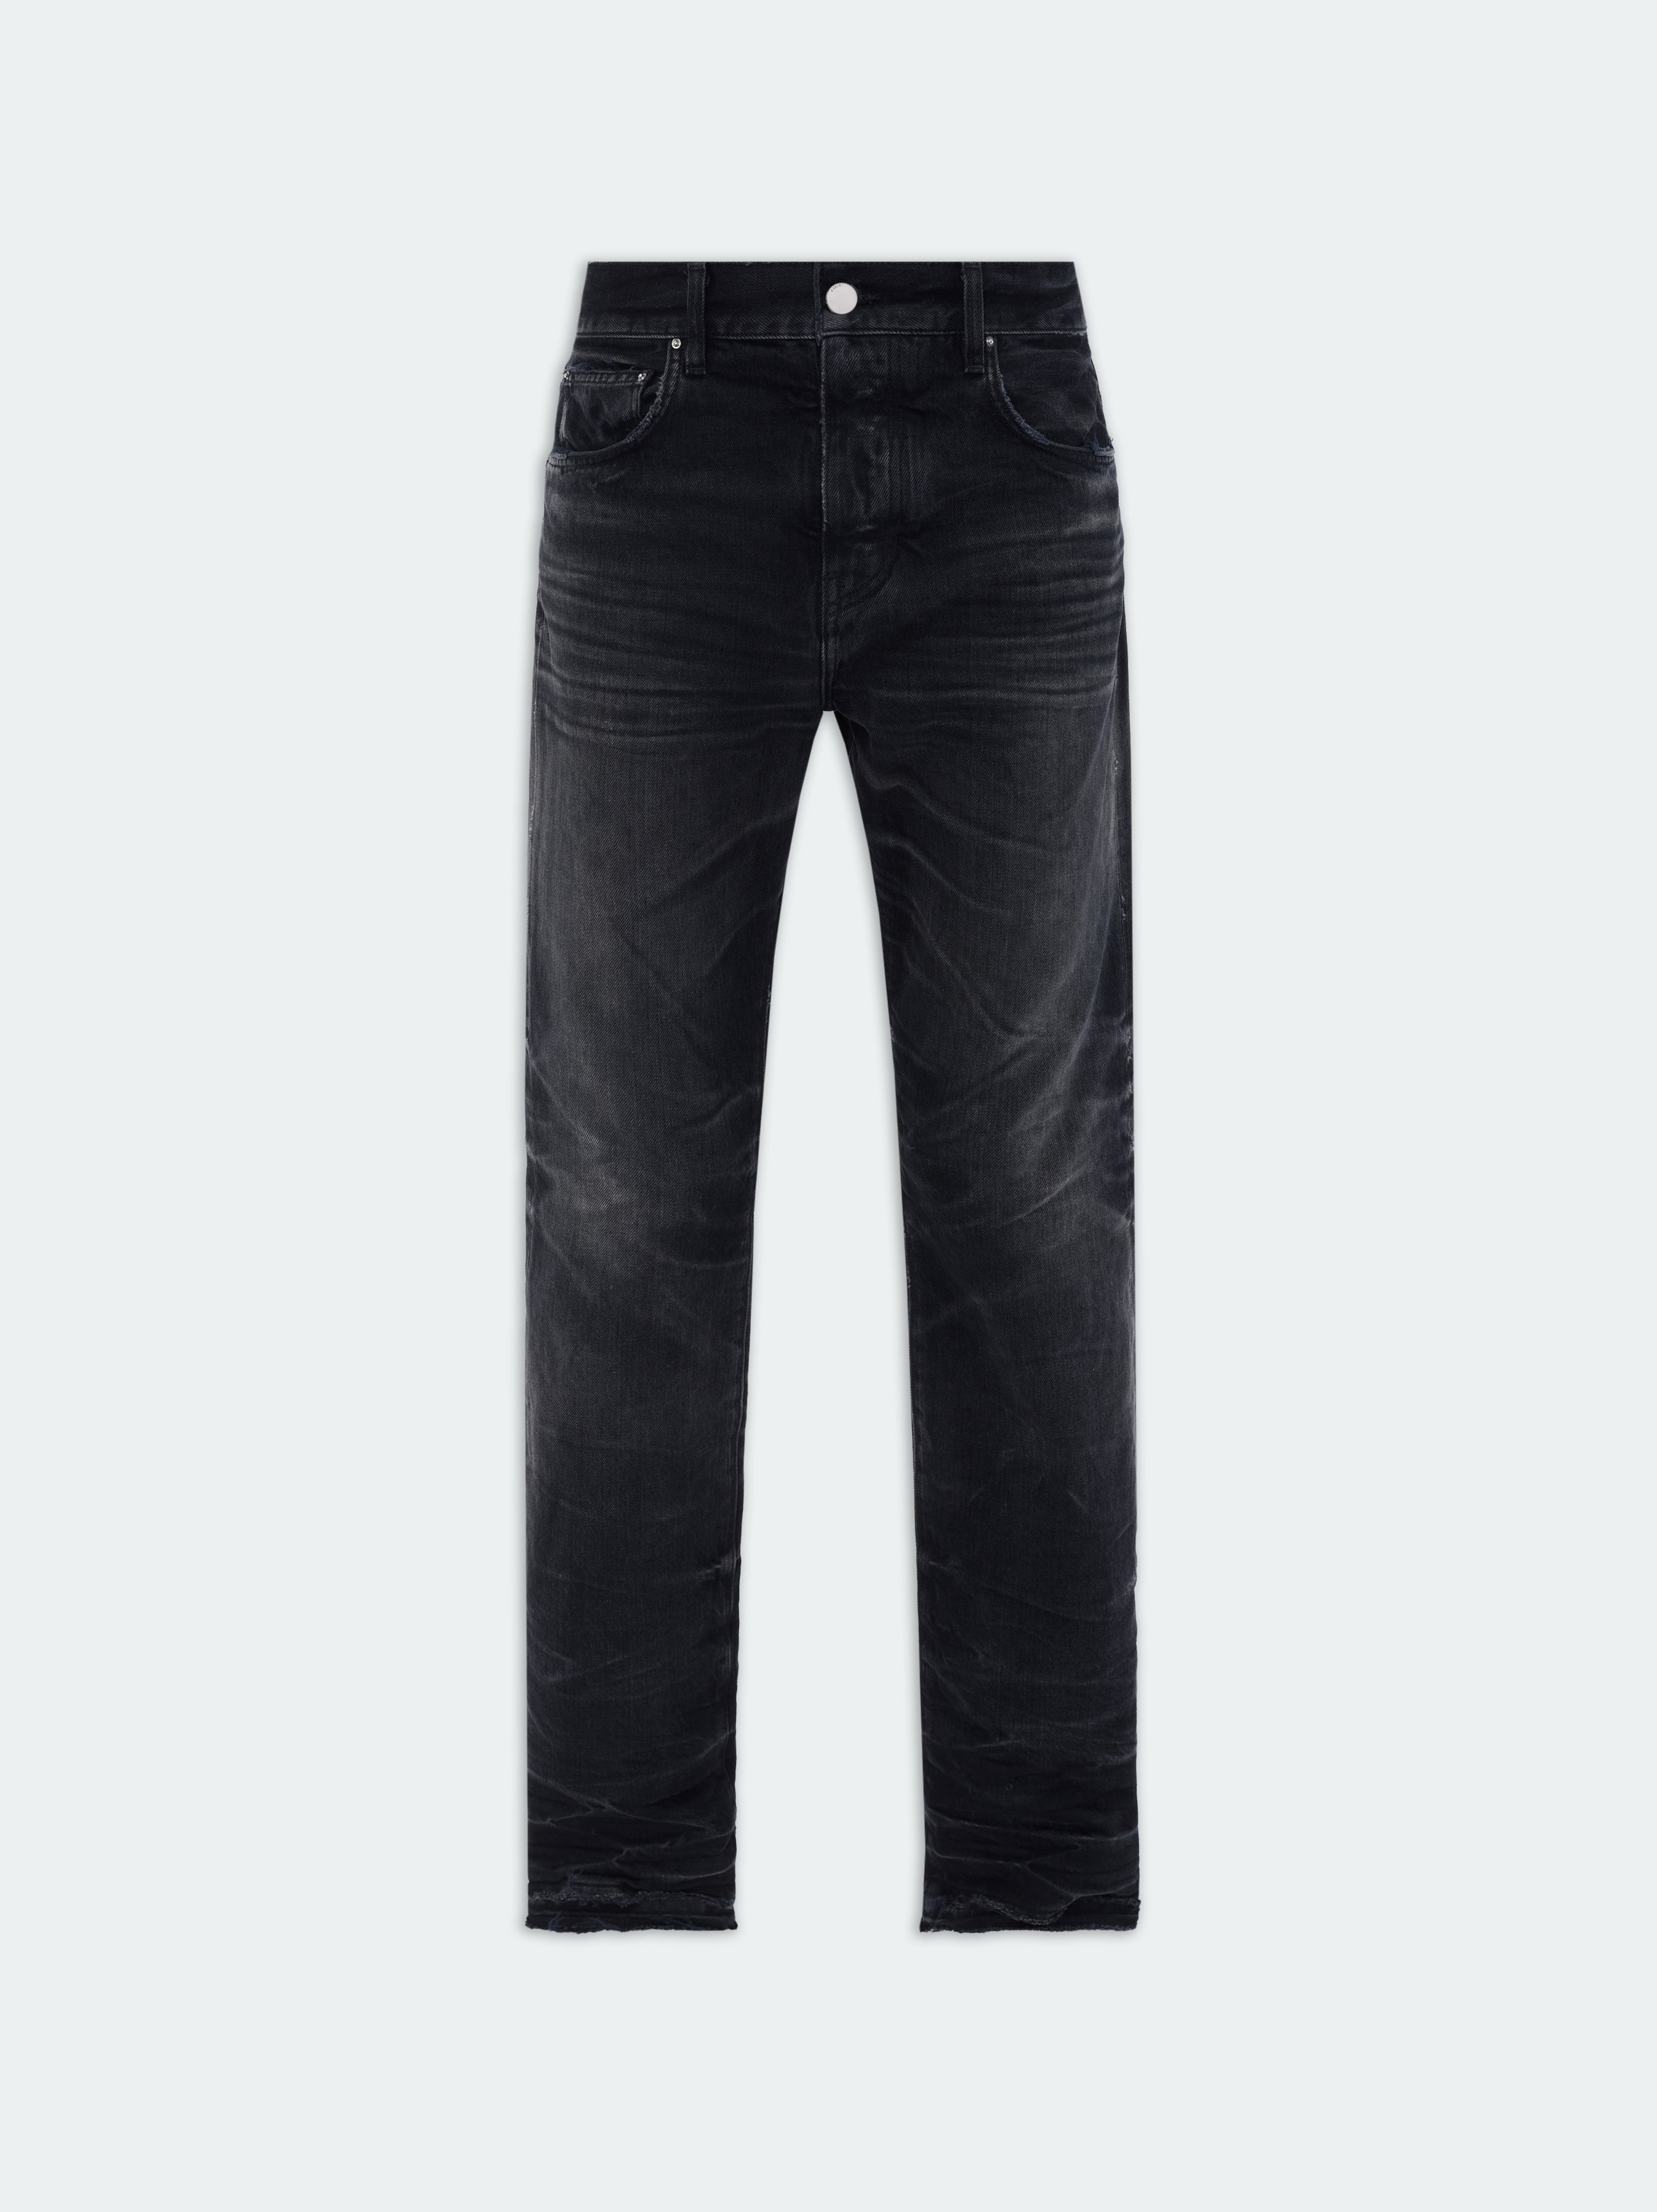 Product RELEASE HEM STRAIGHT JEAN - Faded Black featured image